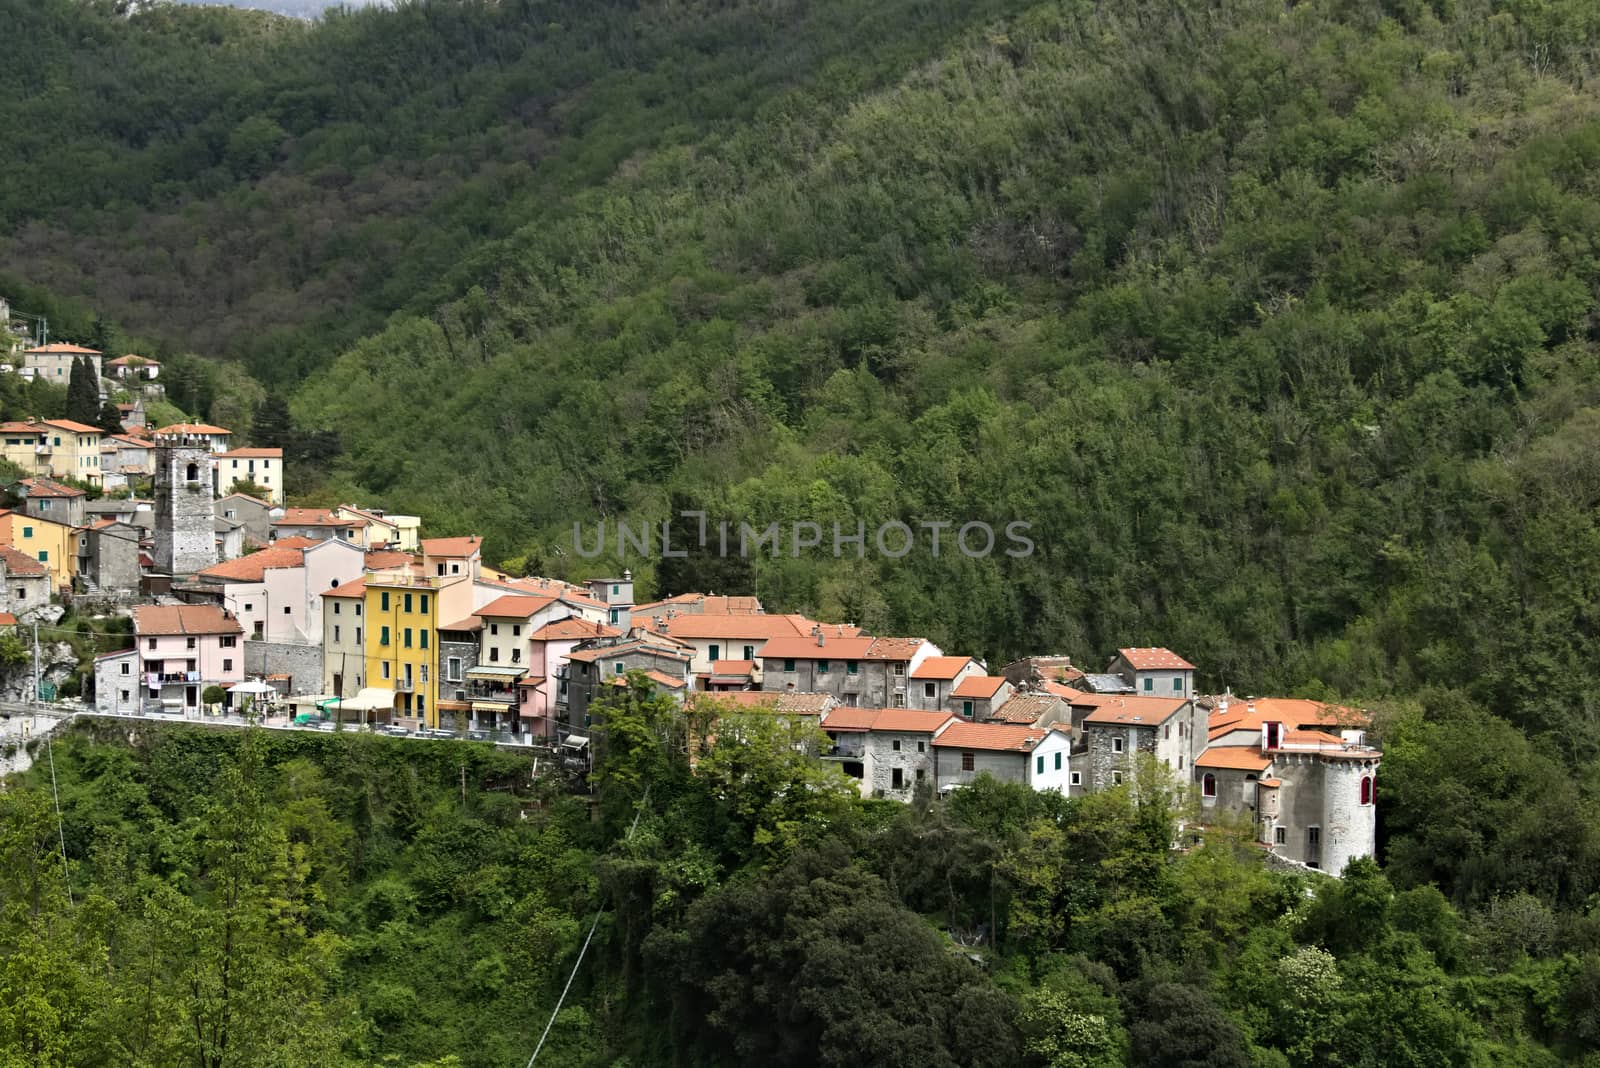 View of the town of Colonnata, famous for the production of lard by Paolo_Grassi